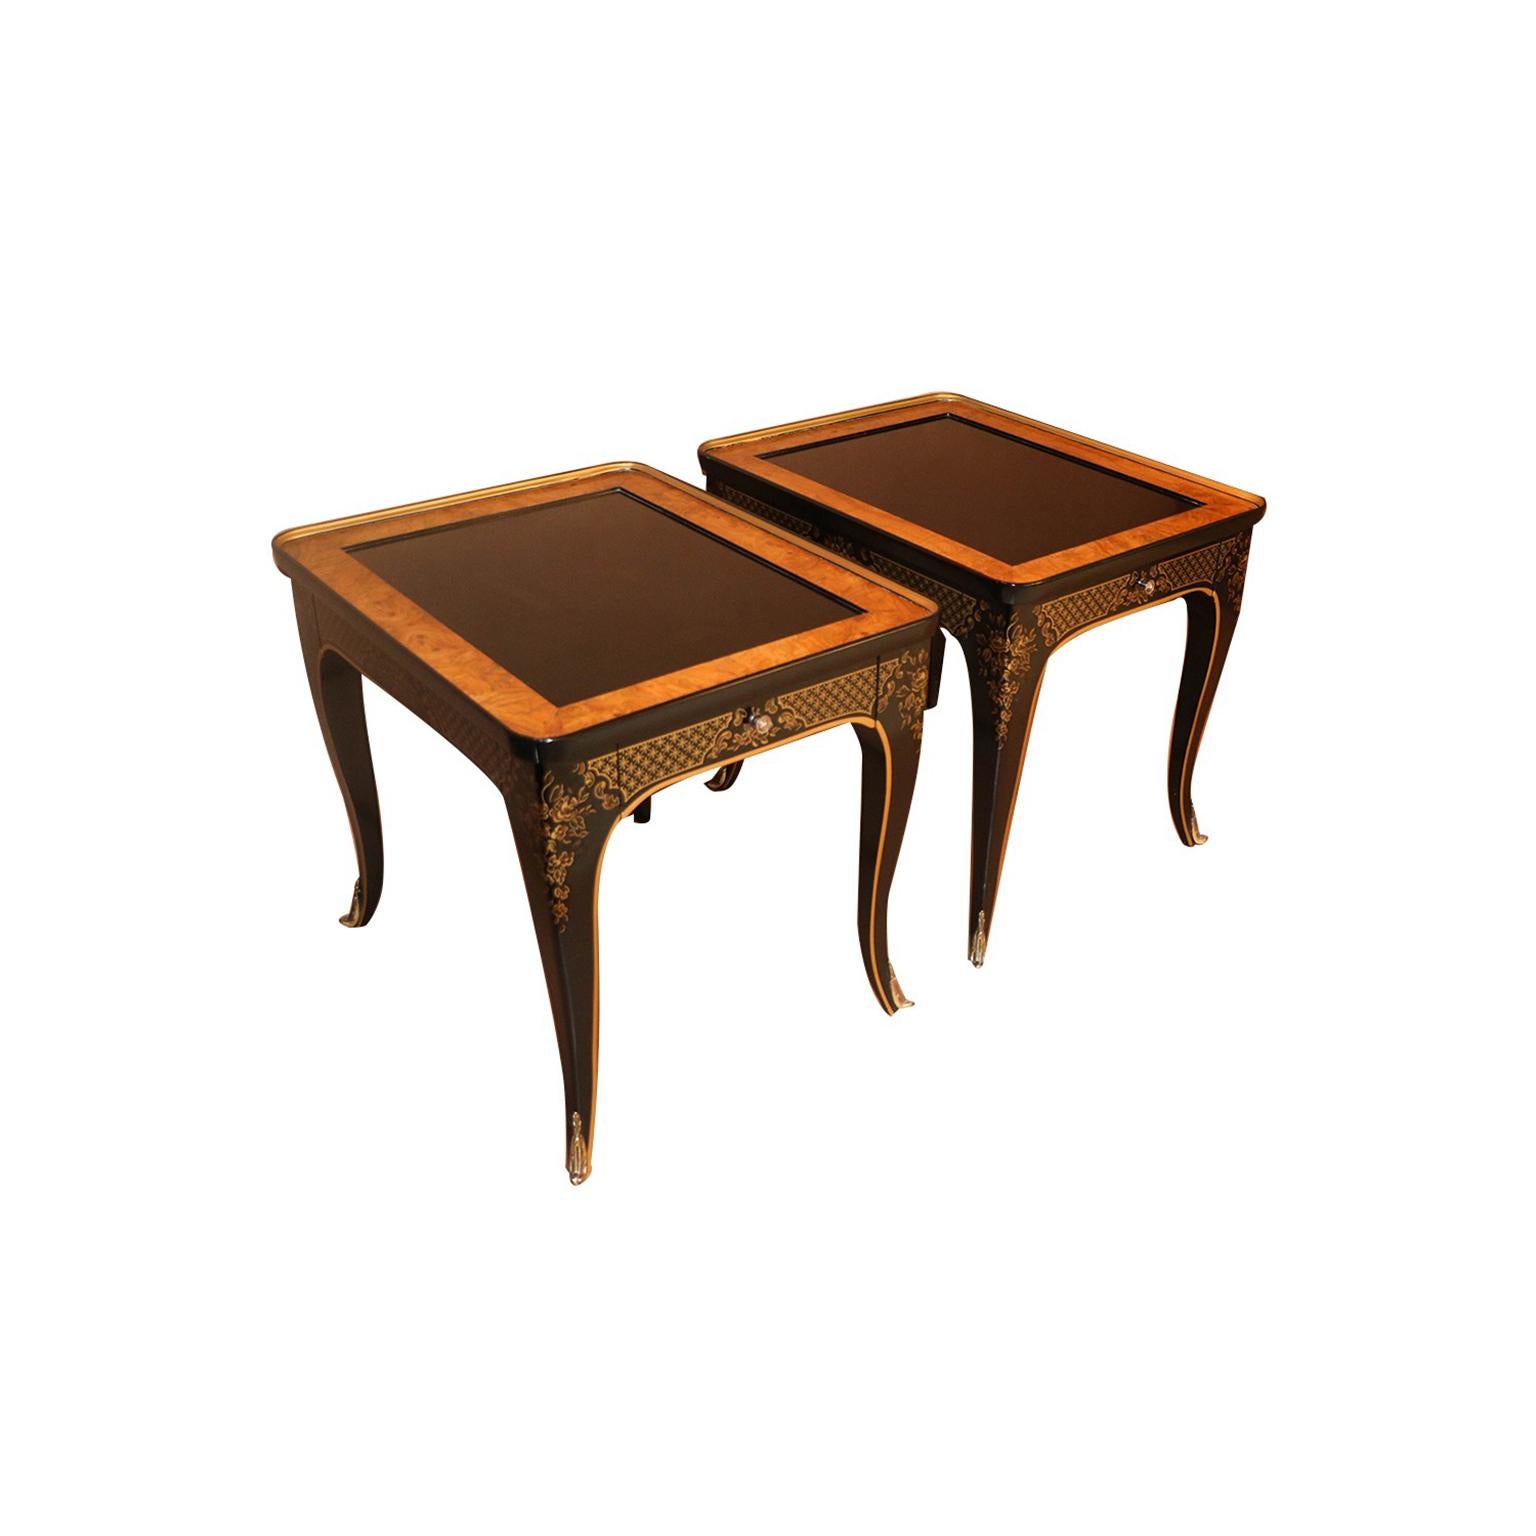 Gorgeous black lacquer, elegant Asian, Chinoiserie style side tables, circa 1970s. This exquisite pair is part of the Et Cetera collection by Drexel. Each features a rectangular black lacquer top with burl wood borders, above a single drawer